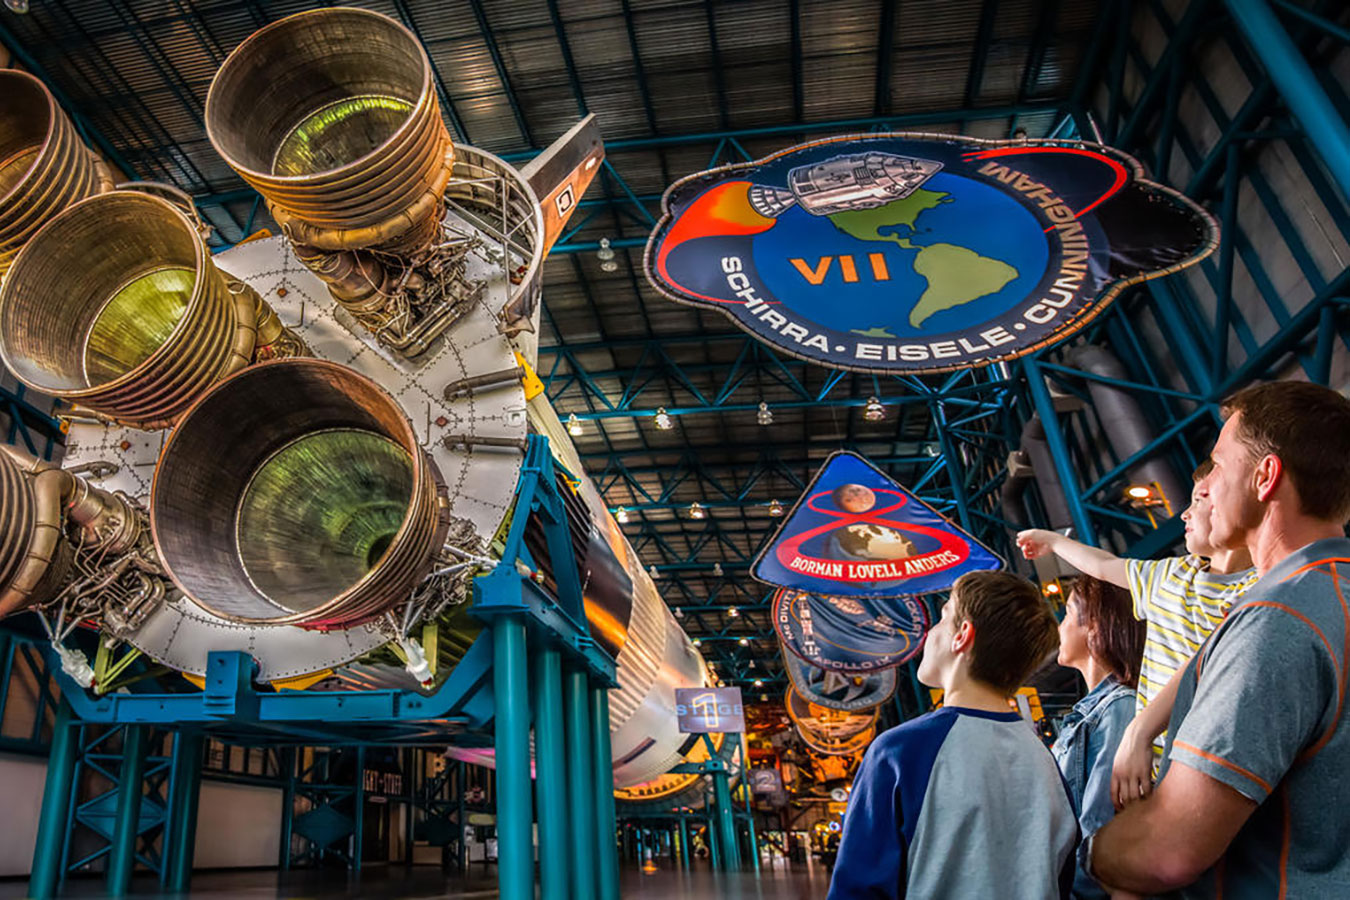 Family looks up to the Saturn V moon rocket on display at the Apollo/Saturn V Center.